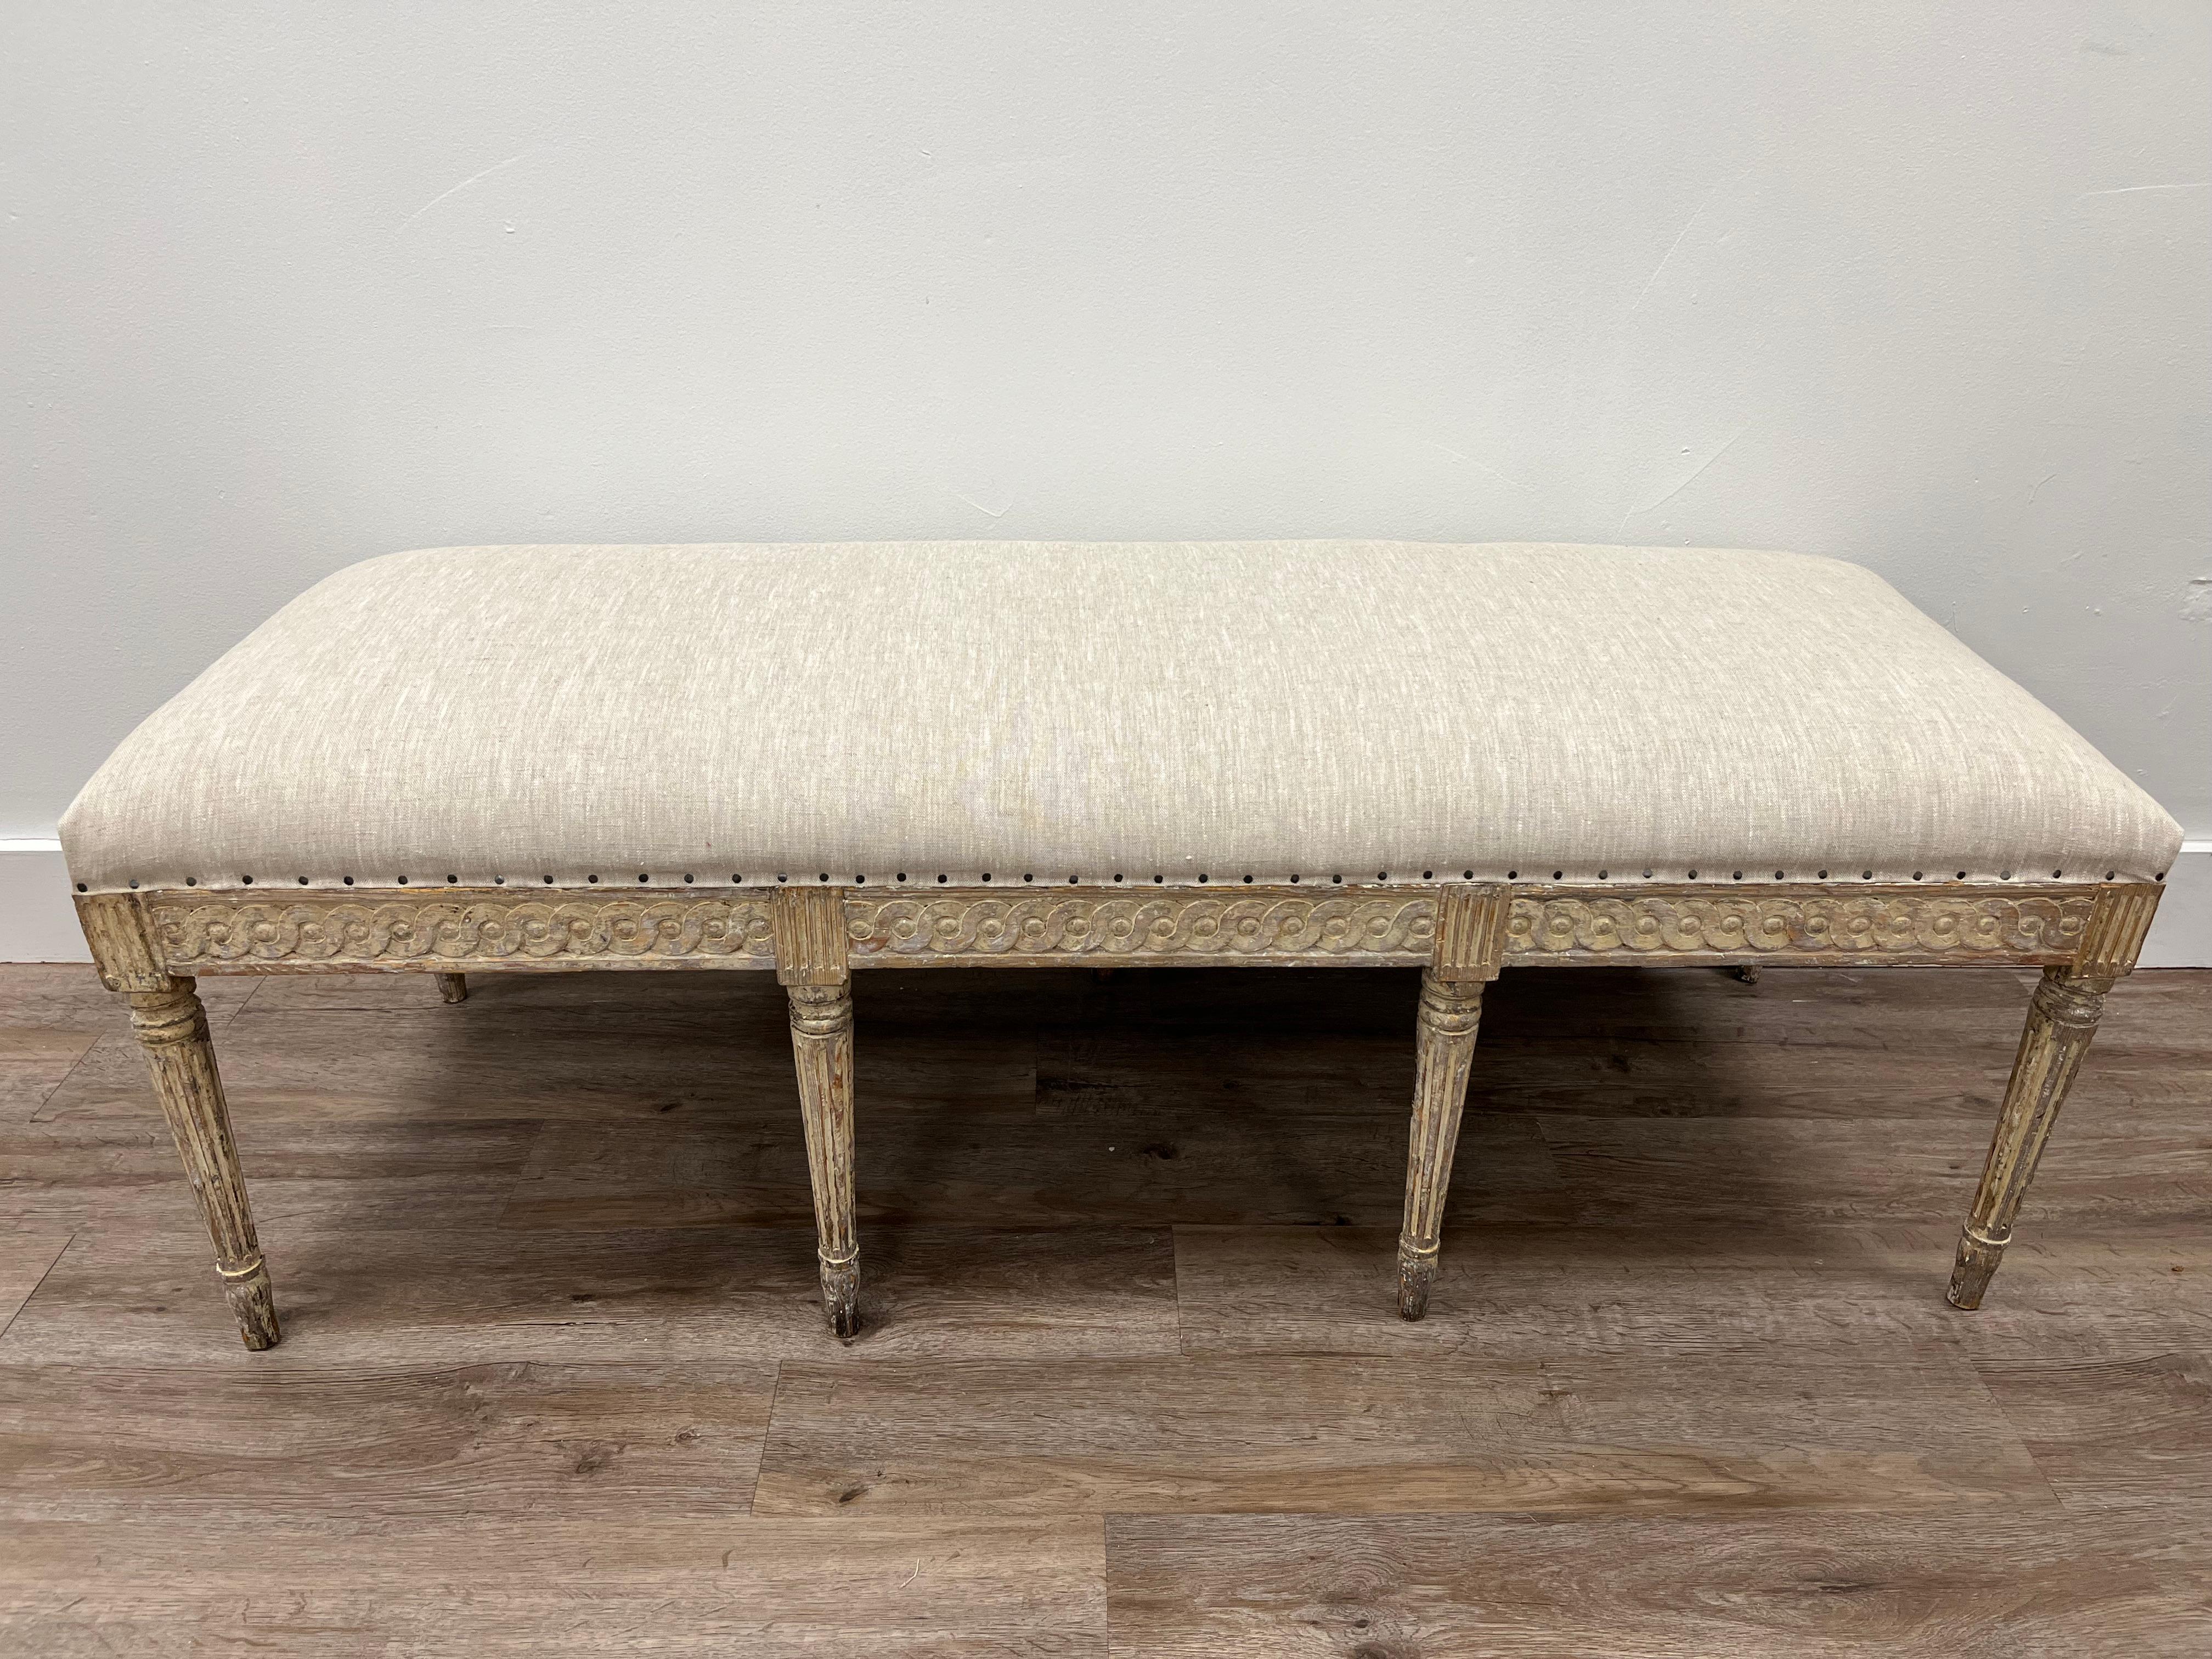 A beautiful Swedish Gustavian bench. Featuring a decorative hand-carved Guilloché scrolling apron on the front and sides with reeded fleurons in between. Legs are tapered and fluted. Meticulously scraped to its original pale yellow paint and